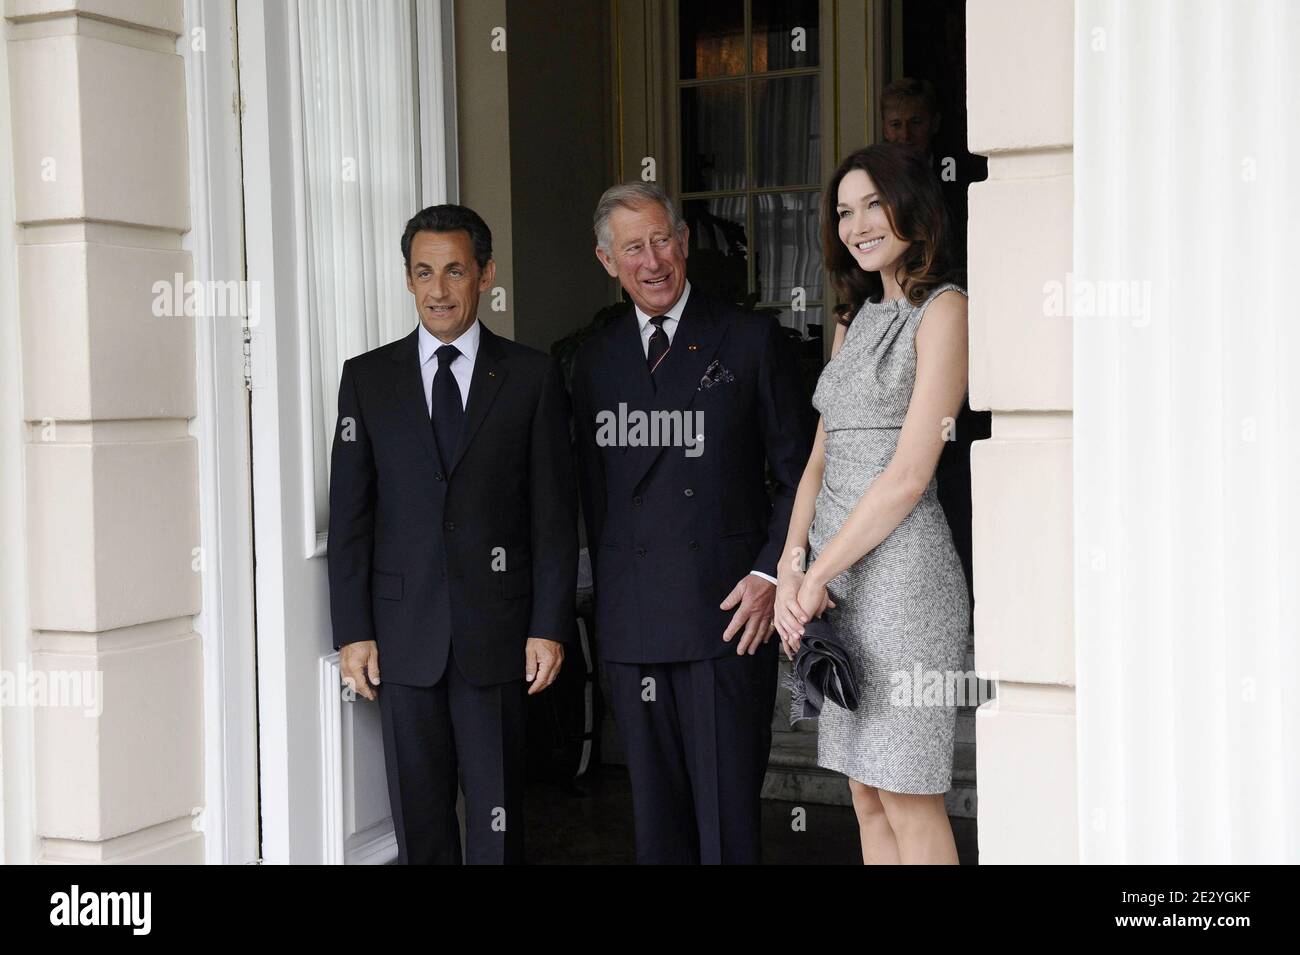 Prince Charles, Prince of Wales greets French President Nicolas Sarkozy and his wife Carla Bruni-Sarkozy at Clarence House in London, UK on June 18, 2010. Nicolas Sarkozy and World War II veterans visited London to mark the 70th anniversary of Charles de Gaulle's rousing radio appeal to his compatriots to resist the Nazi occupation. On June 18, 1940, four days after the fall of Paris and as the French government prepared to sign an armistice with Germany, the exiled military leader issued an impassioned appeal over the BBC airwaves to those back home. Photo by Elodie Gregoire/ABACAPRESS.COM Stock Photo